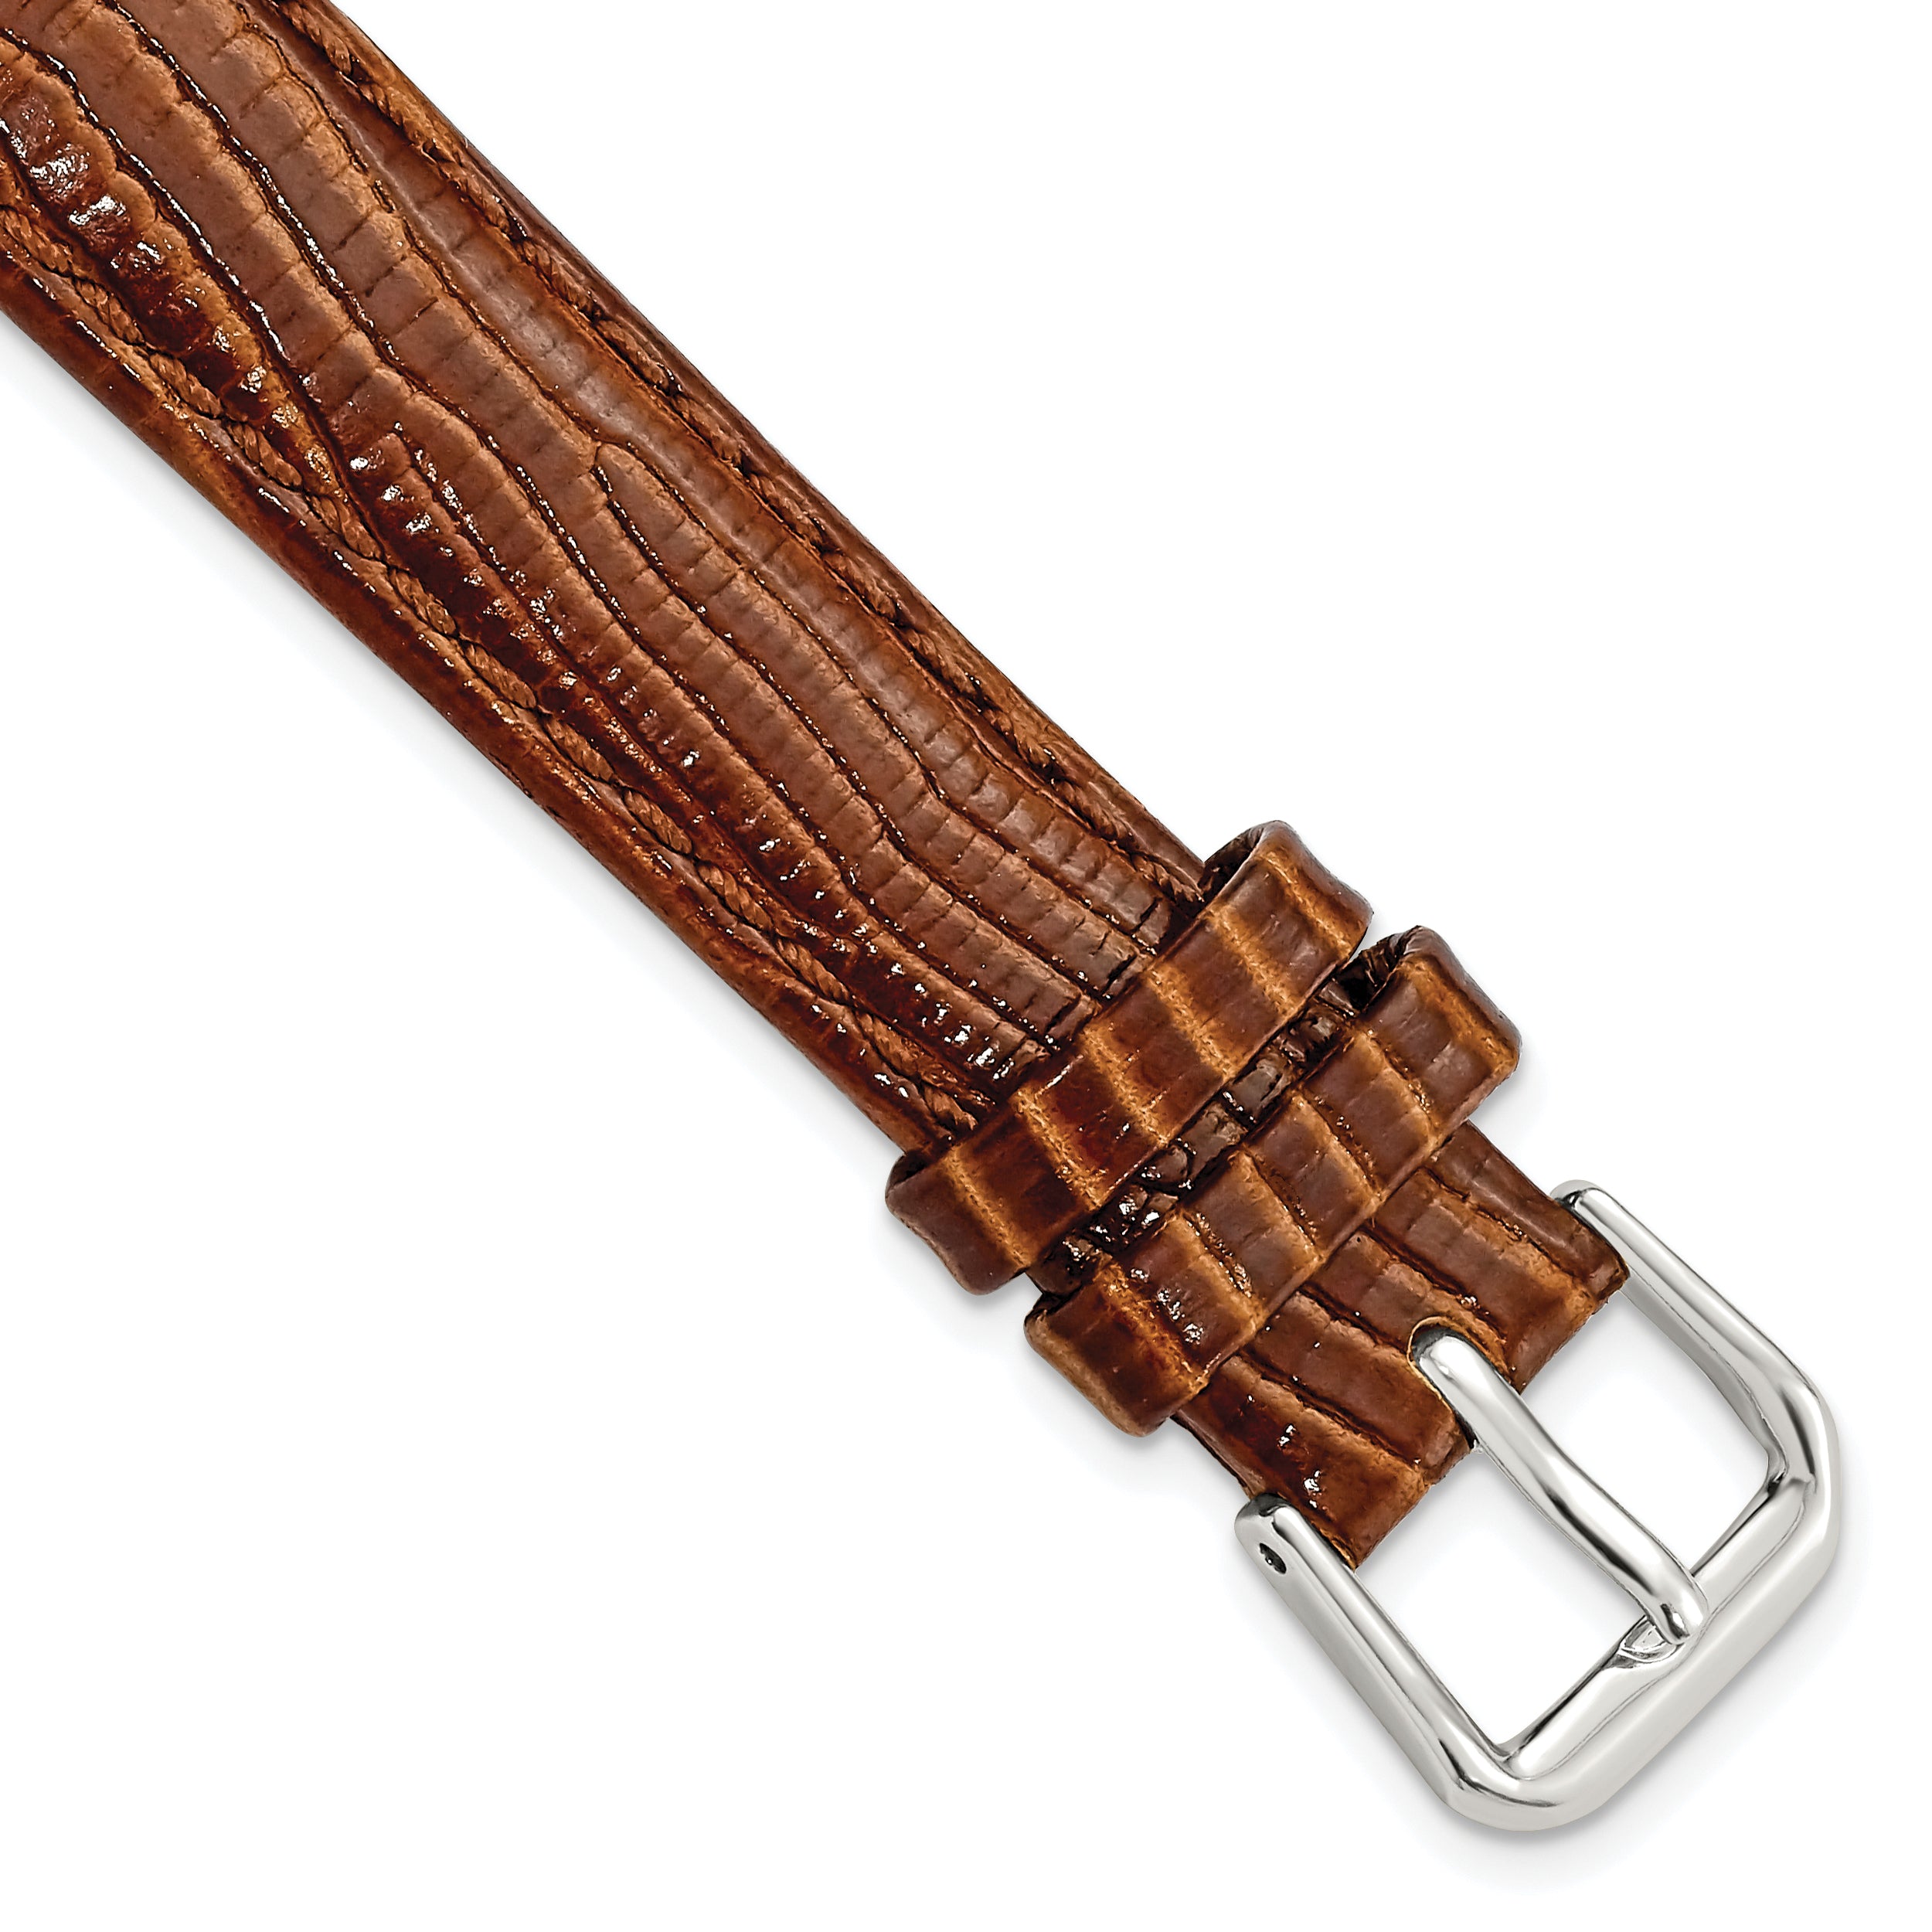 DeBeer 14mm Havana Brown Snake Grain Leather with Silver-tone Buckle 6.75 inch Watch Band